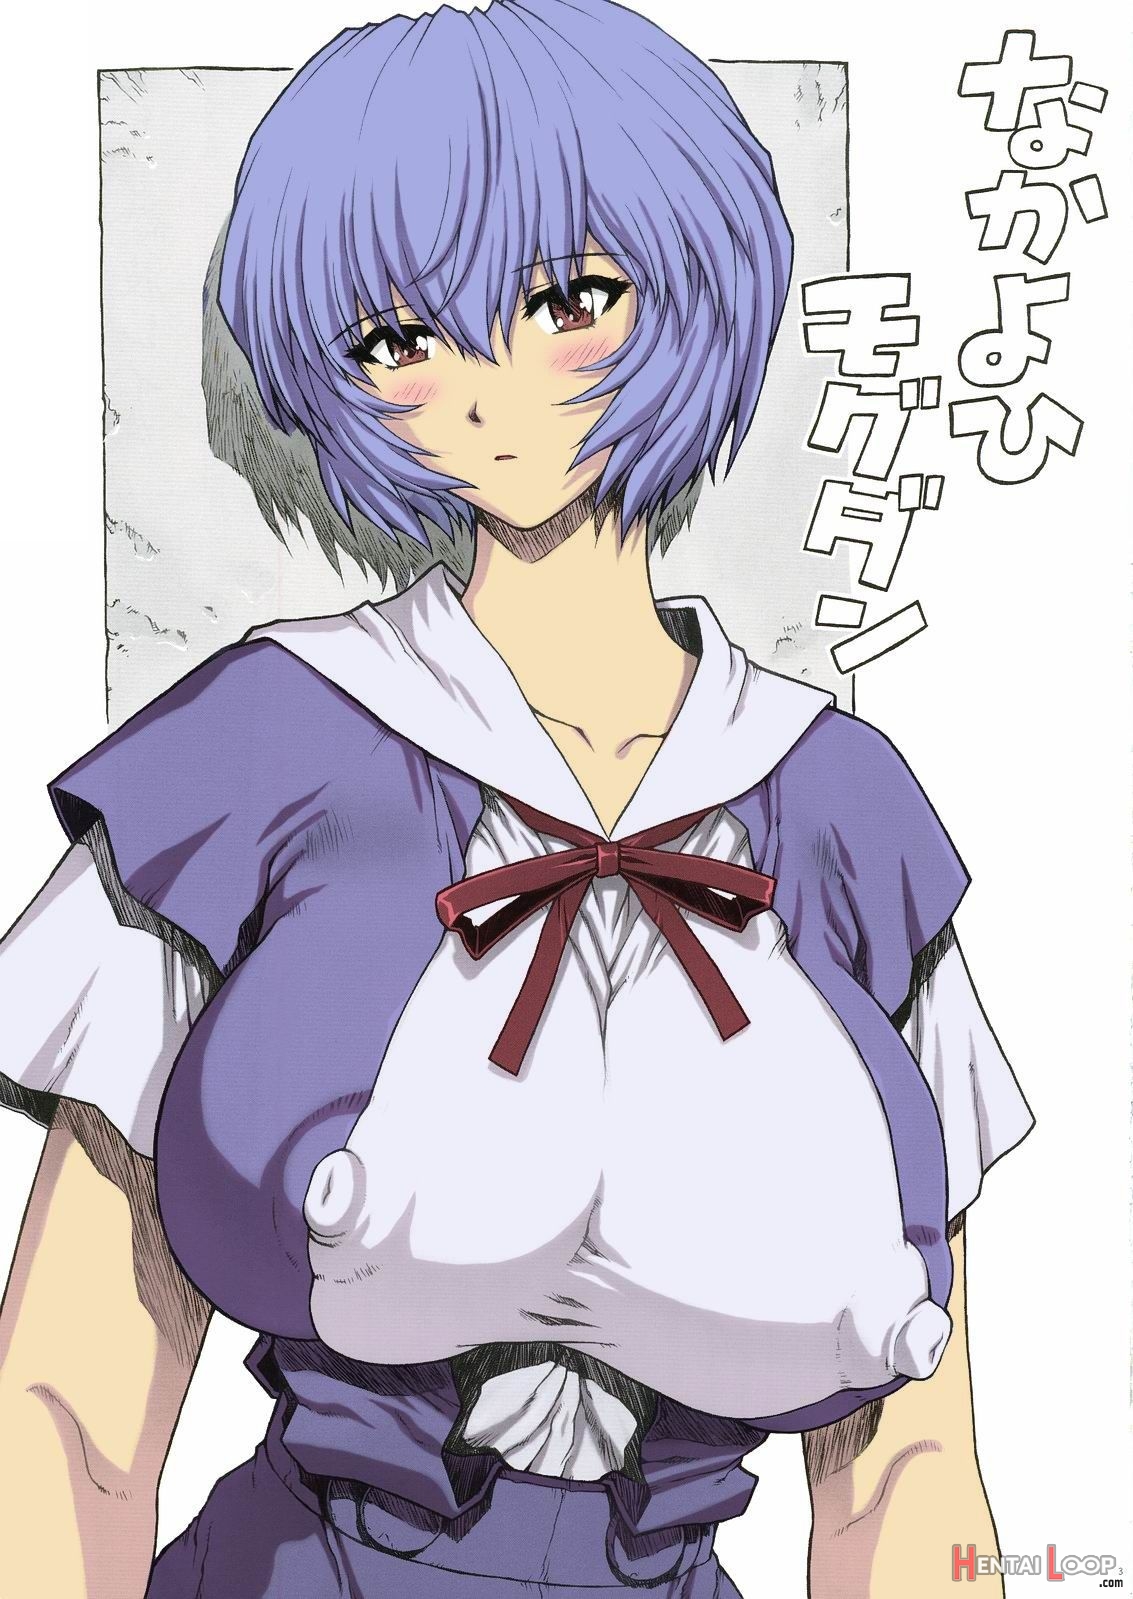 Ayanami Rei 00 - Colorized page 2